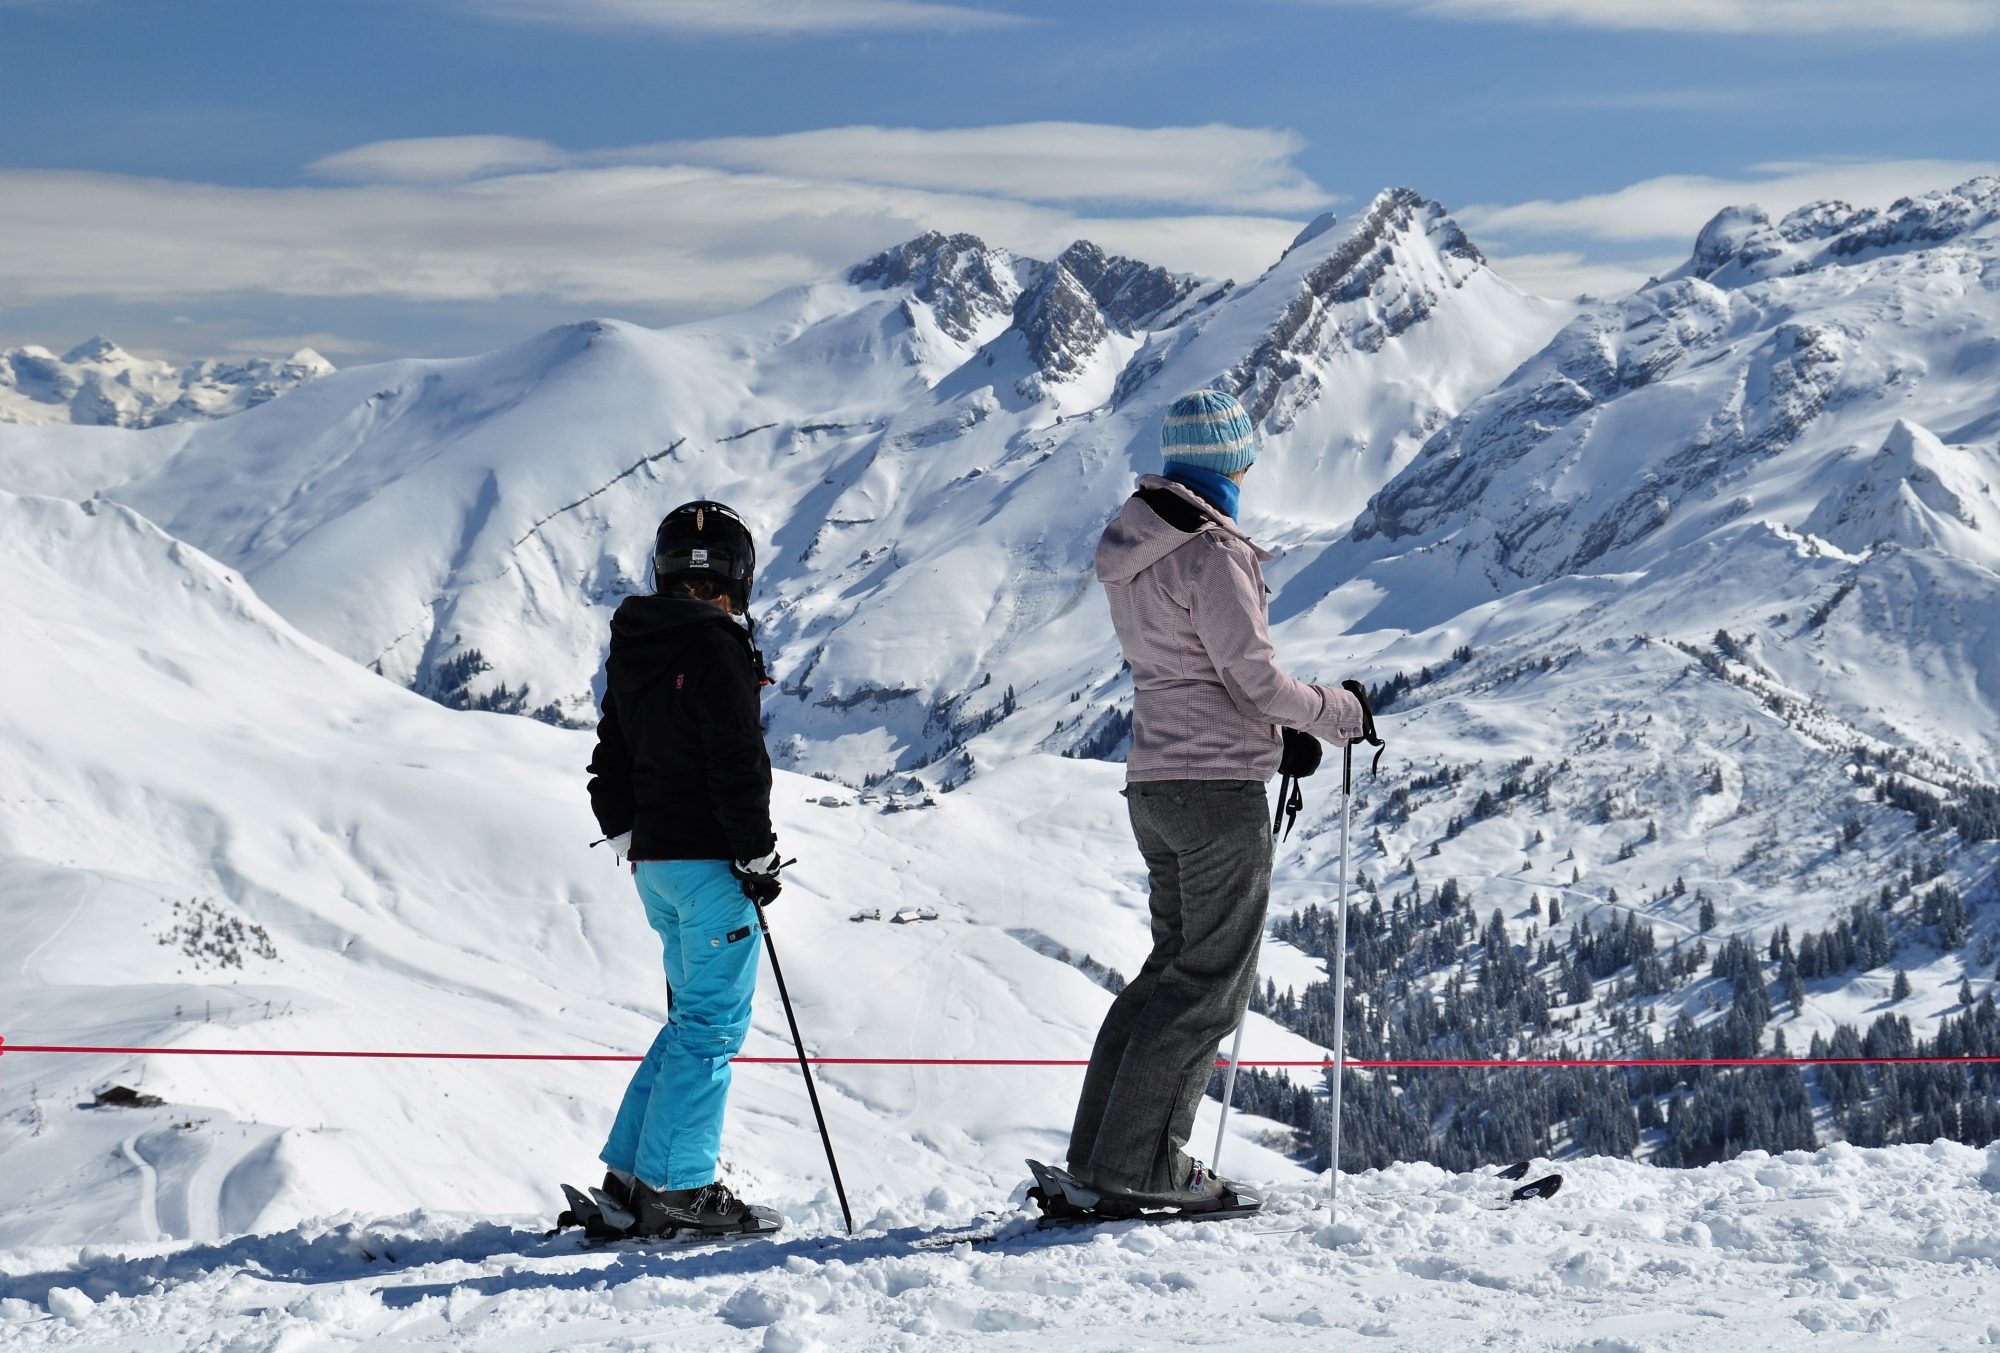 Le Grand Bornand and La Clusaz – Two Villages Best Skied Together